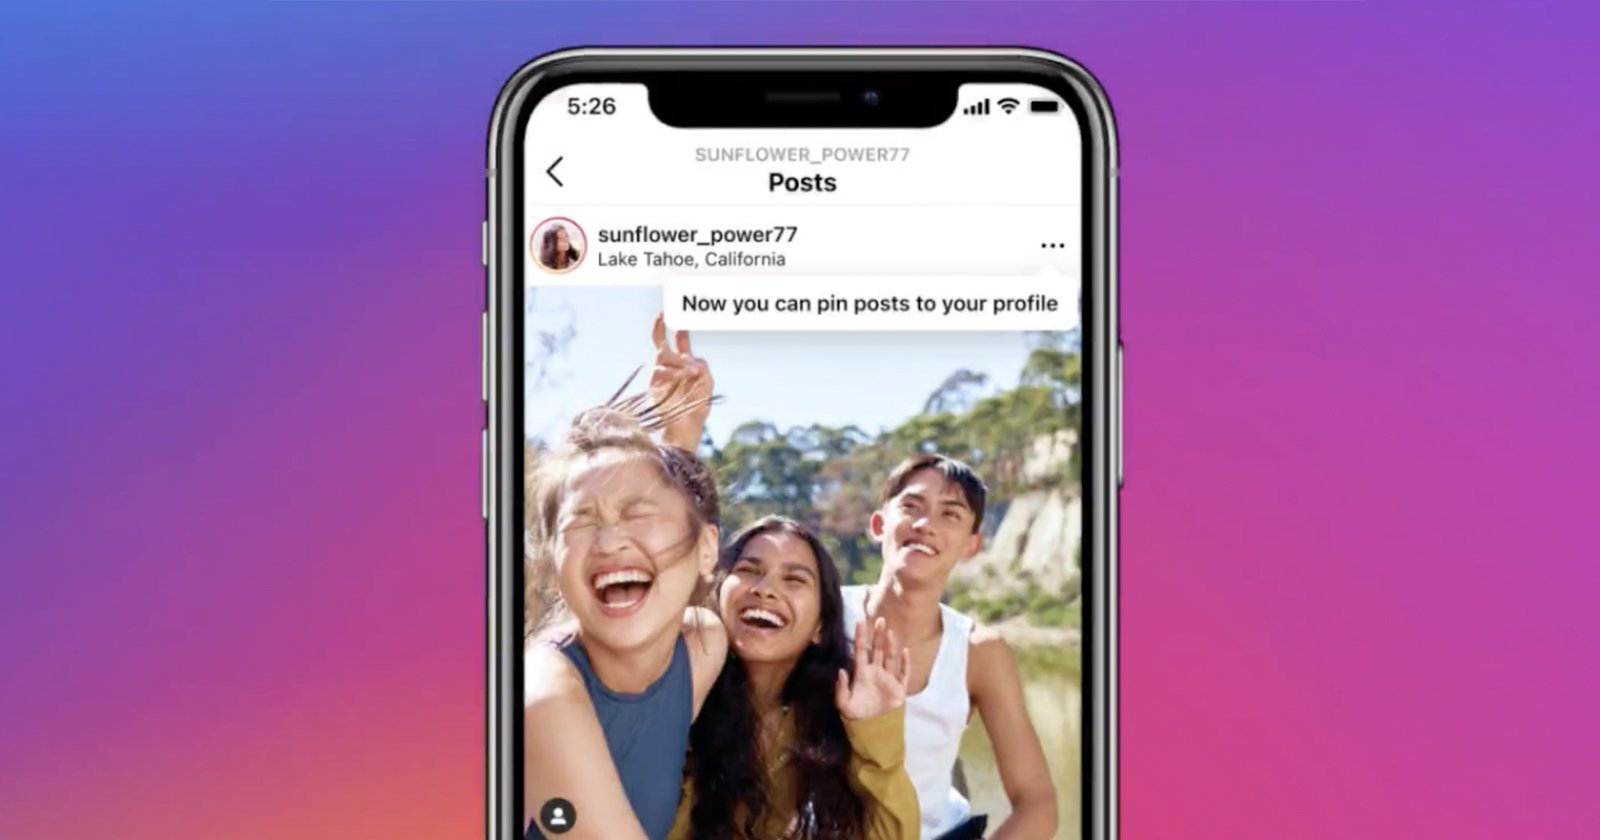 Instagram has launched new features, the post will be visible on the top